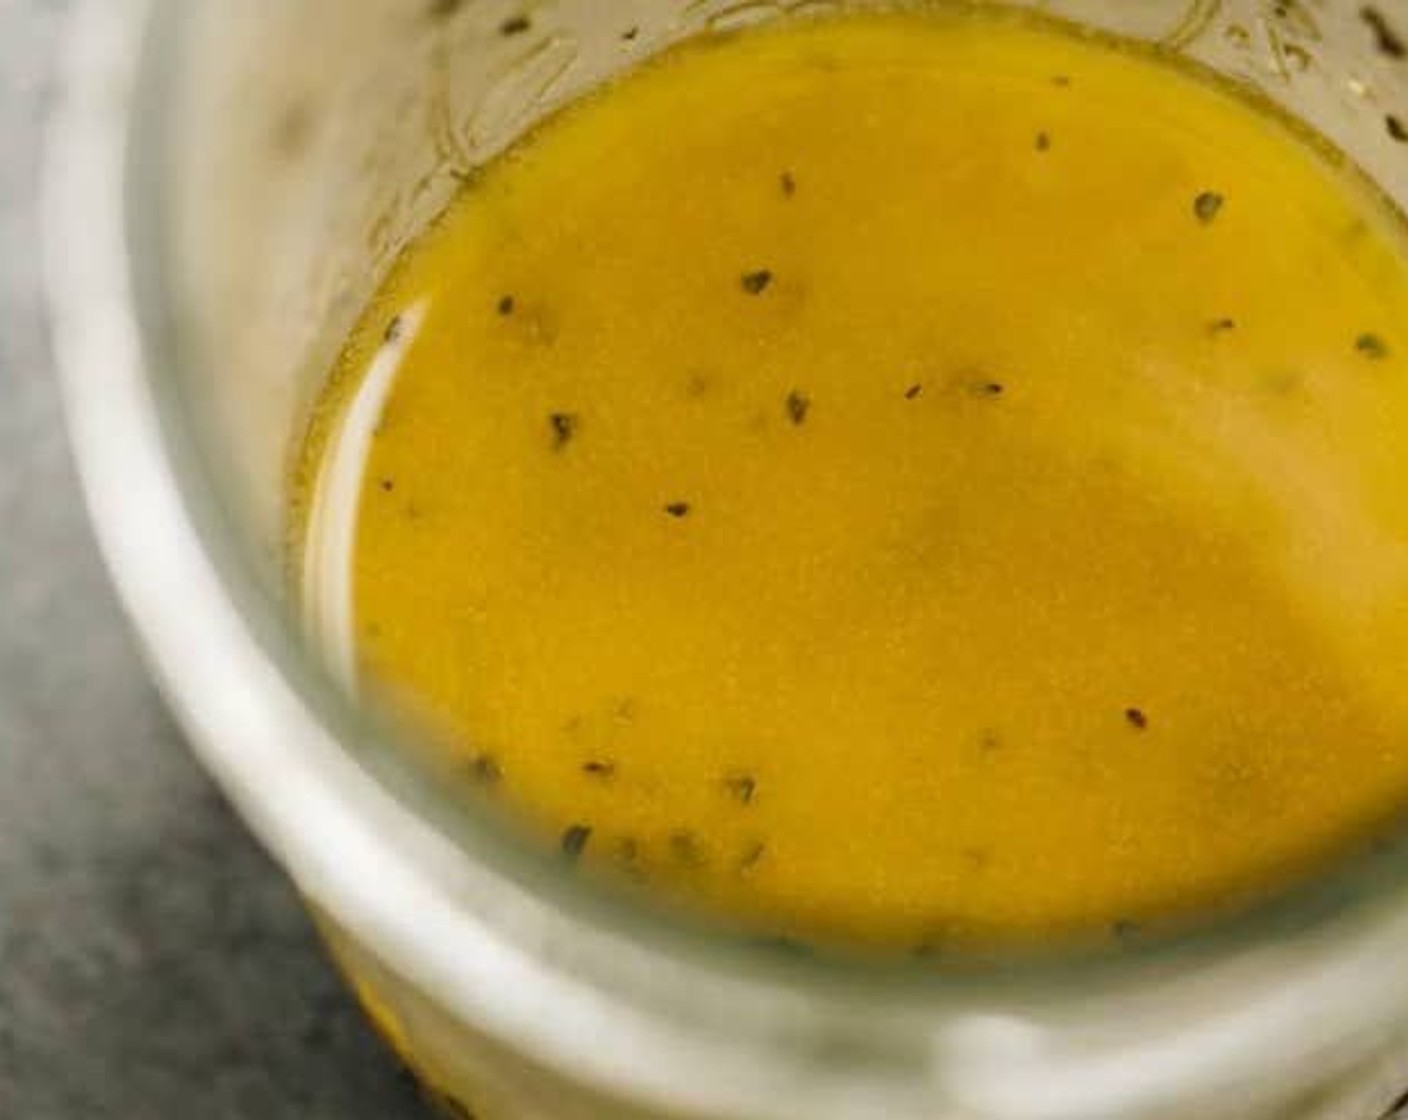 step 1 Add Olive Oil (1/4 cup), Red Wine Vinegar (2 Tbsp), Dijon Mustard (1 tsp), McCormick® Garlic Powder (1/2 tsp), Dried Oregano (1/2 tsp), Salt (1/2 tsp), and Ground Black Pepper (1/4 tsp) to a jar with a lid. I use a mason jar. Shake vigorously to combine all ingredients.